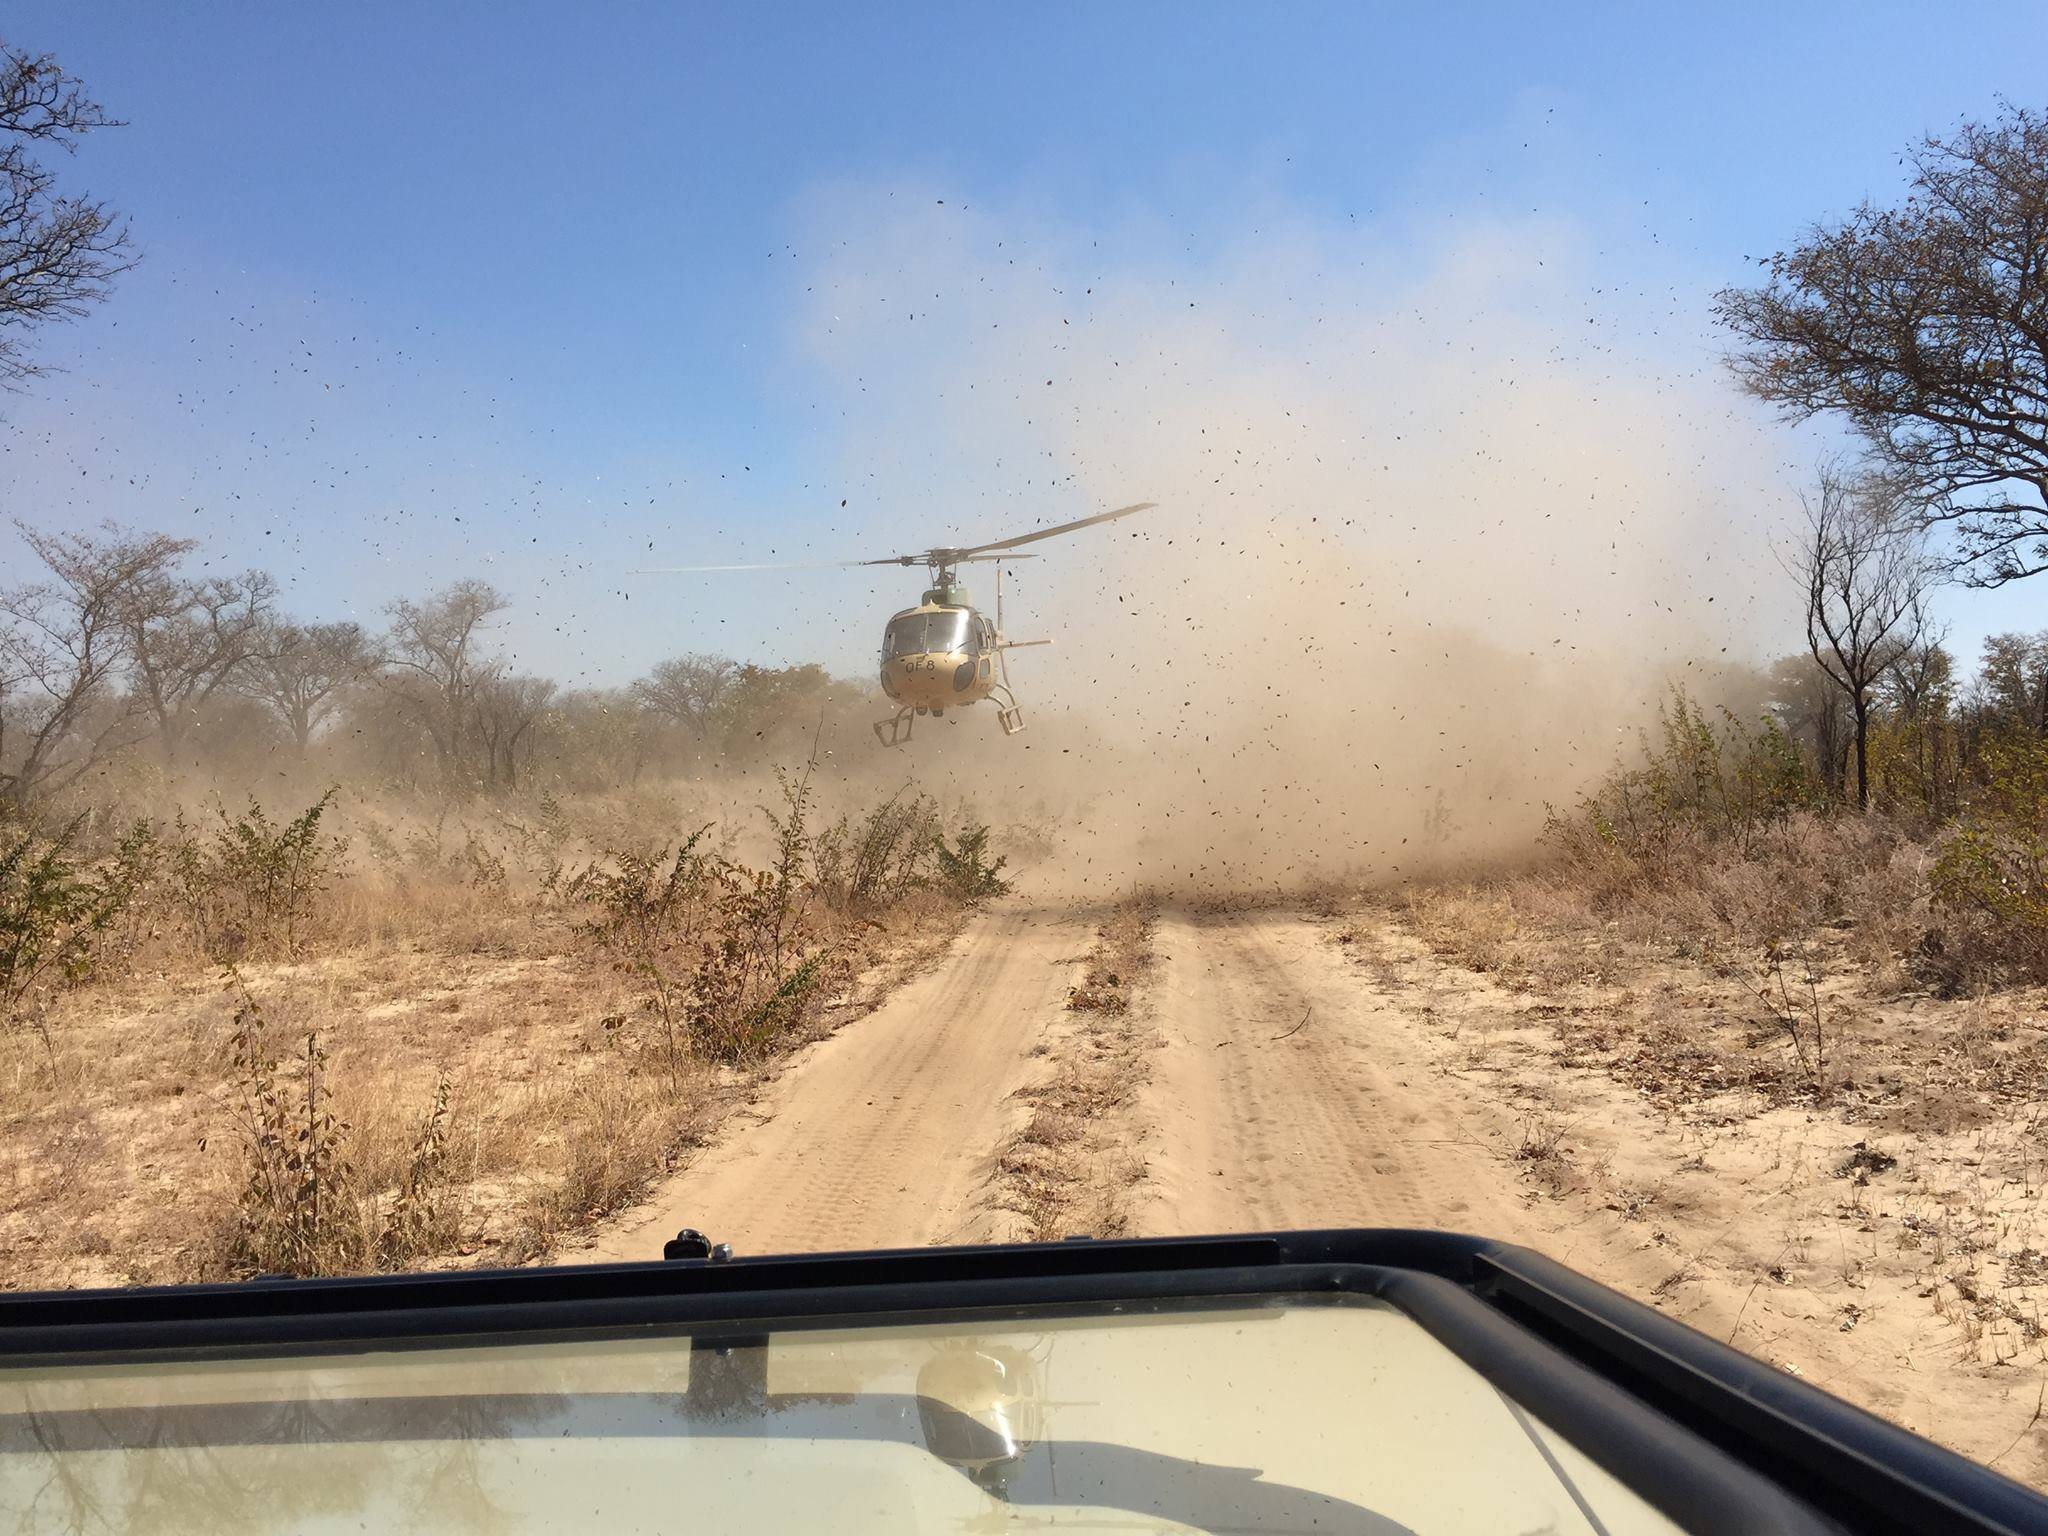 Safari Guide Gets Mistaken As a Poacher... Chopper Appears Out of Nowhere!